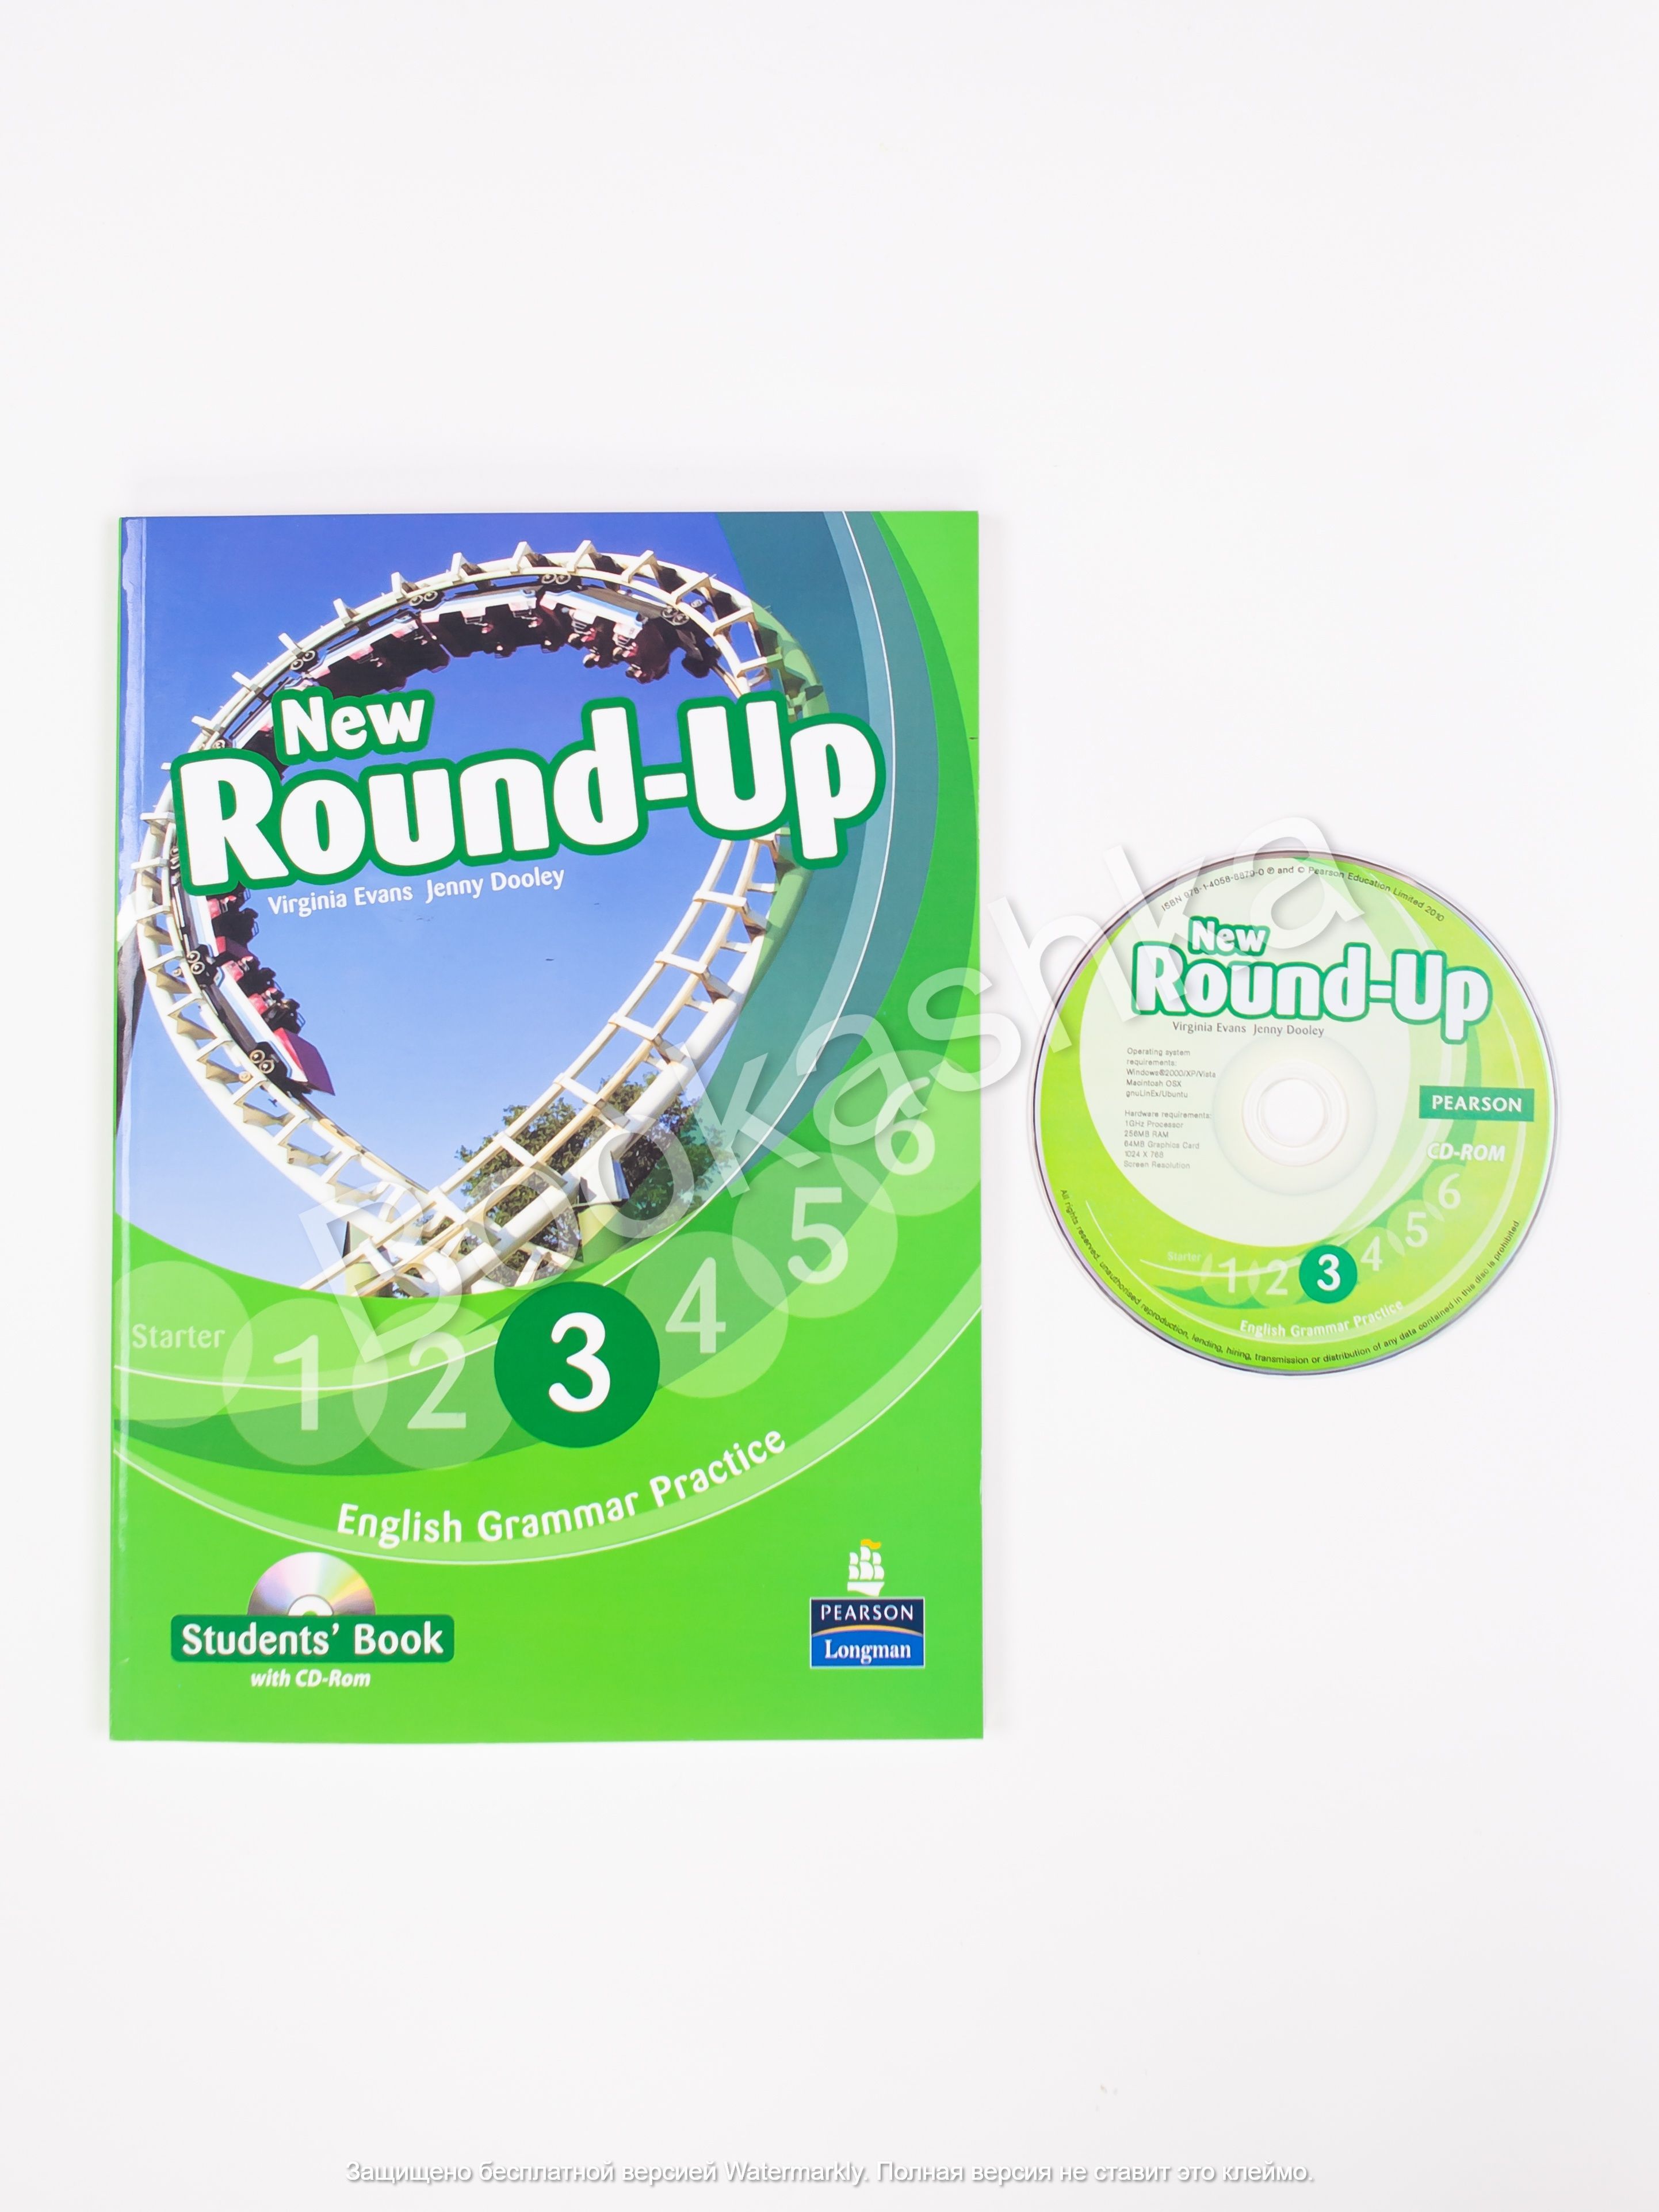 Round up 1. New Round up 3. New Round up 1. New Round up 2. New round up 3 students book